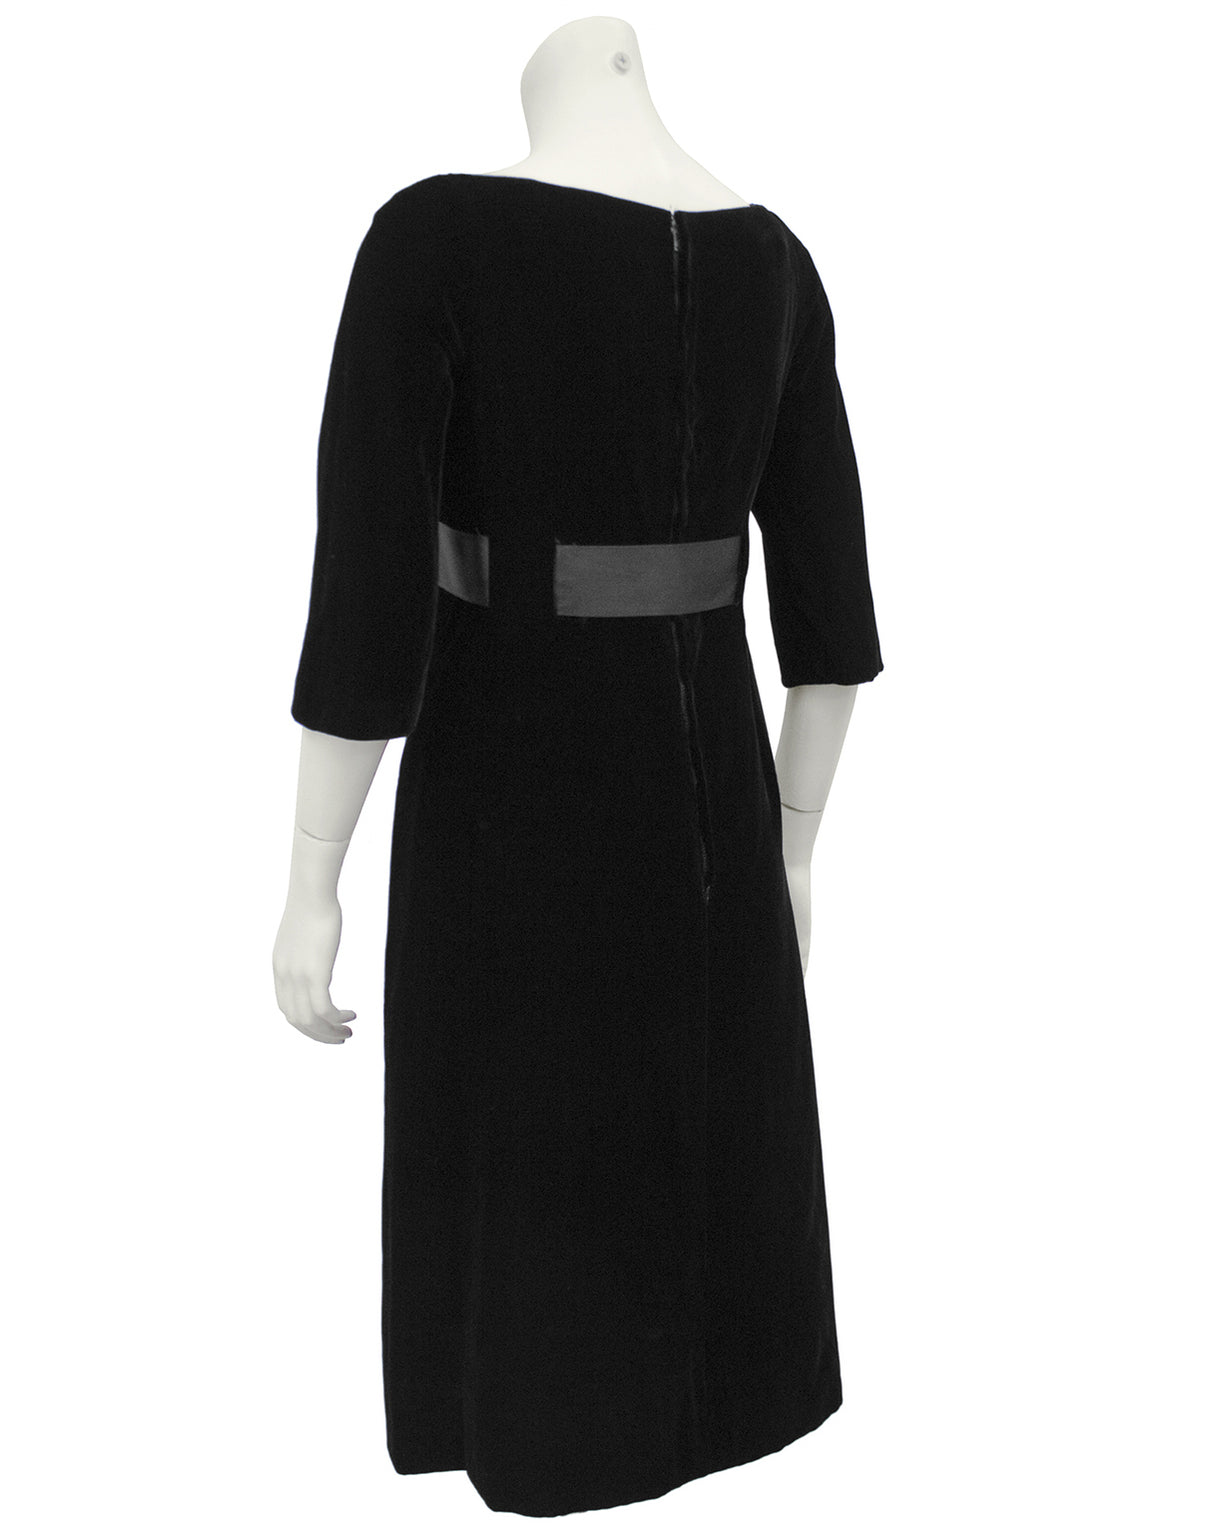 Black Velvet Dress with Bow – Vintage Couture